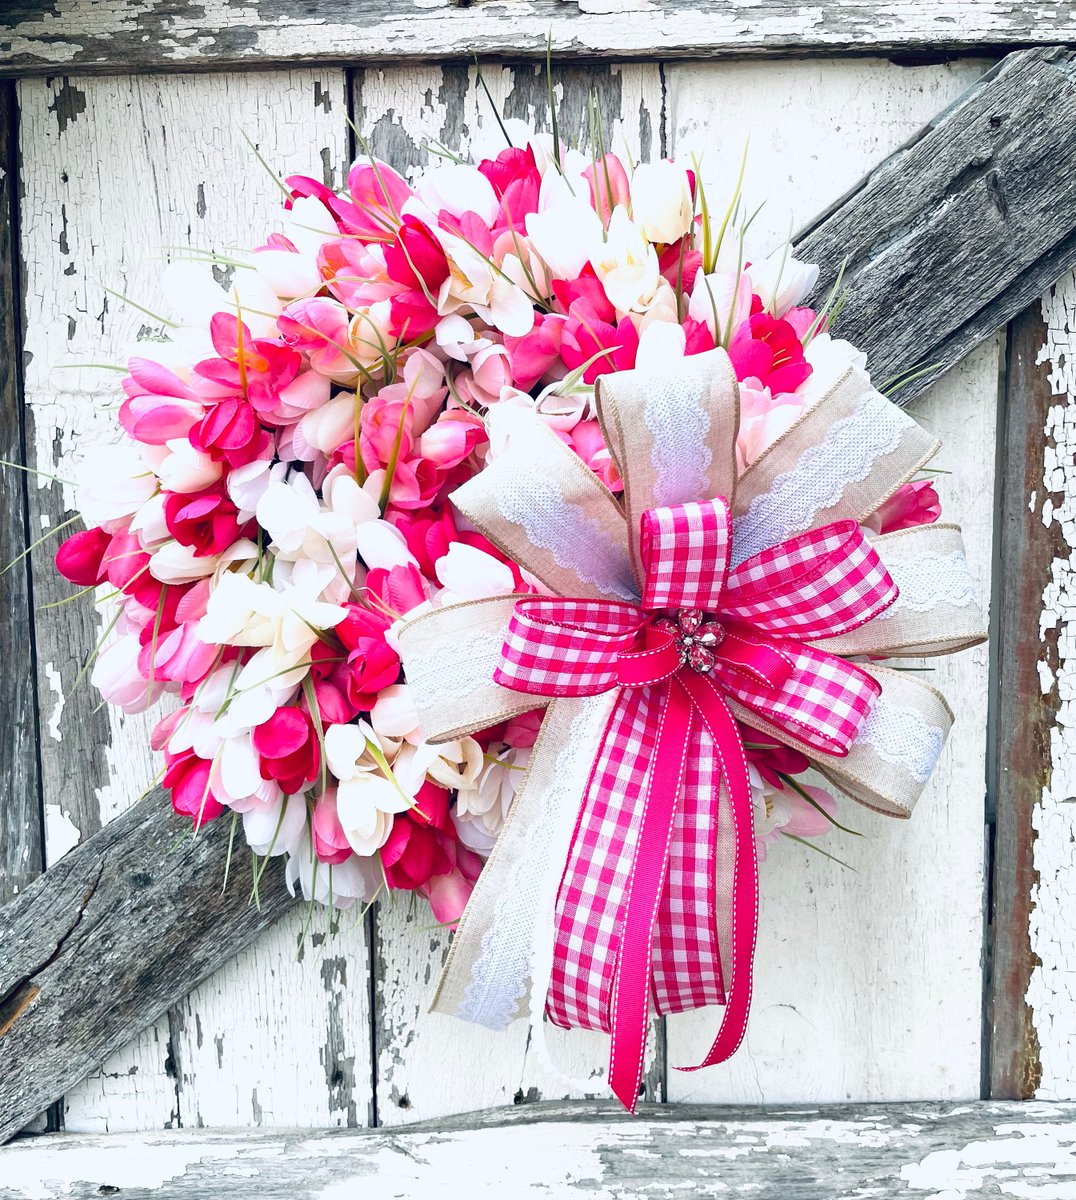 Excited to share the latest addition to my #etsy shop: Spring Tulip Front Door Wreath, Tulip Heart Wreath. And, right now is 60% OFF! etsy.me/3pal0GO #housewarming #countryfarmhouse #spring #pink #mothersday #pinkwhitedecor #farmhousewreath #KMKcommunity